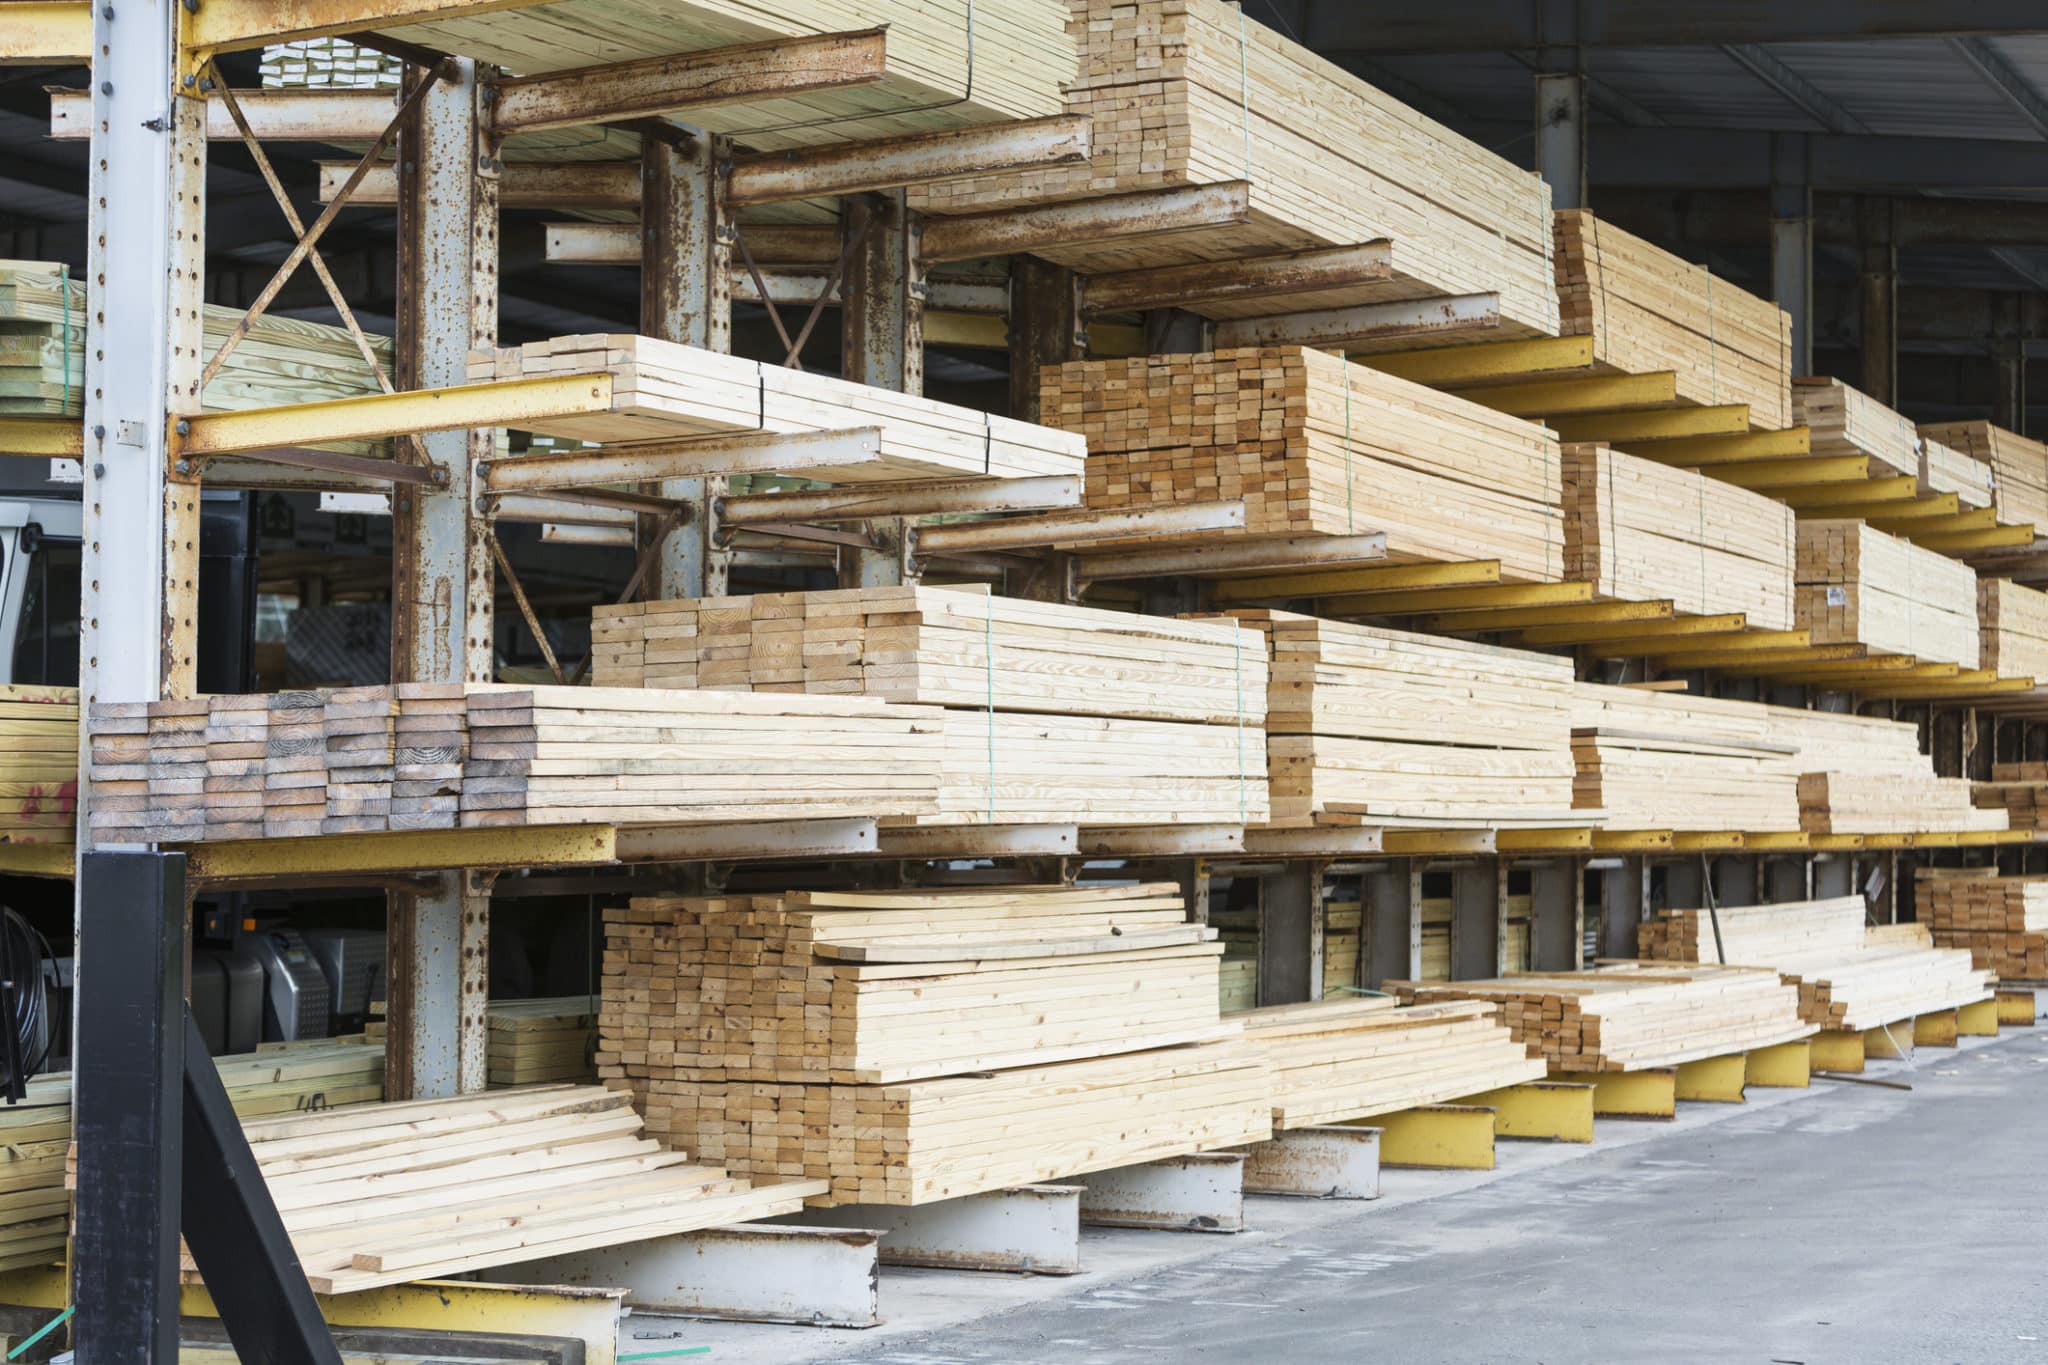 7 ways to get your building materials cheap or free!